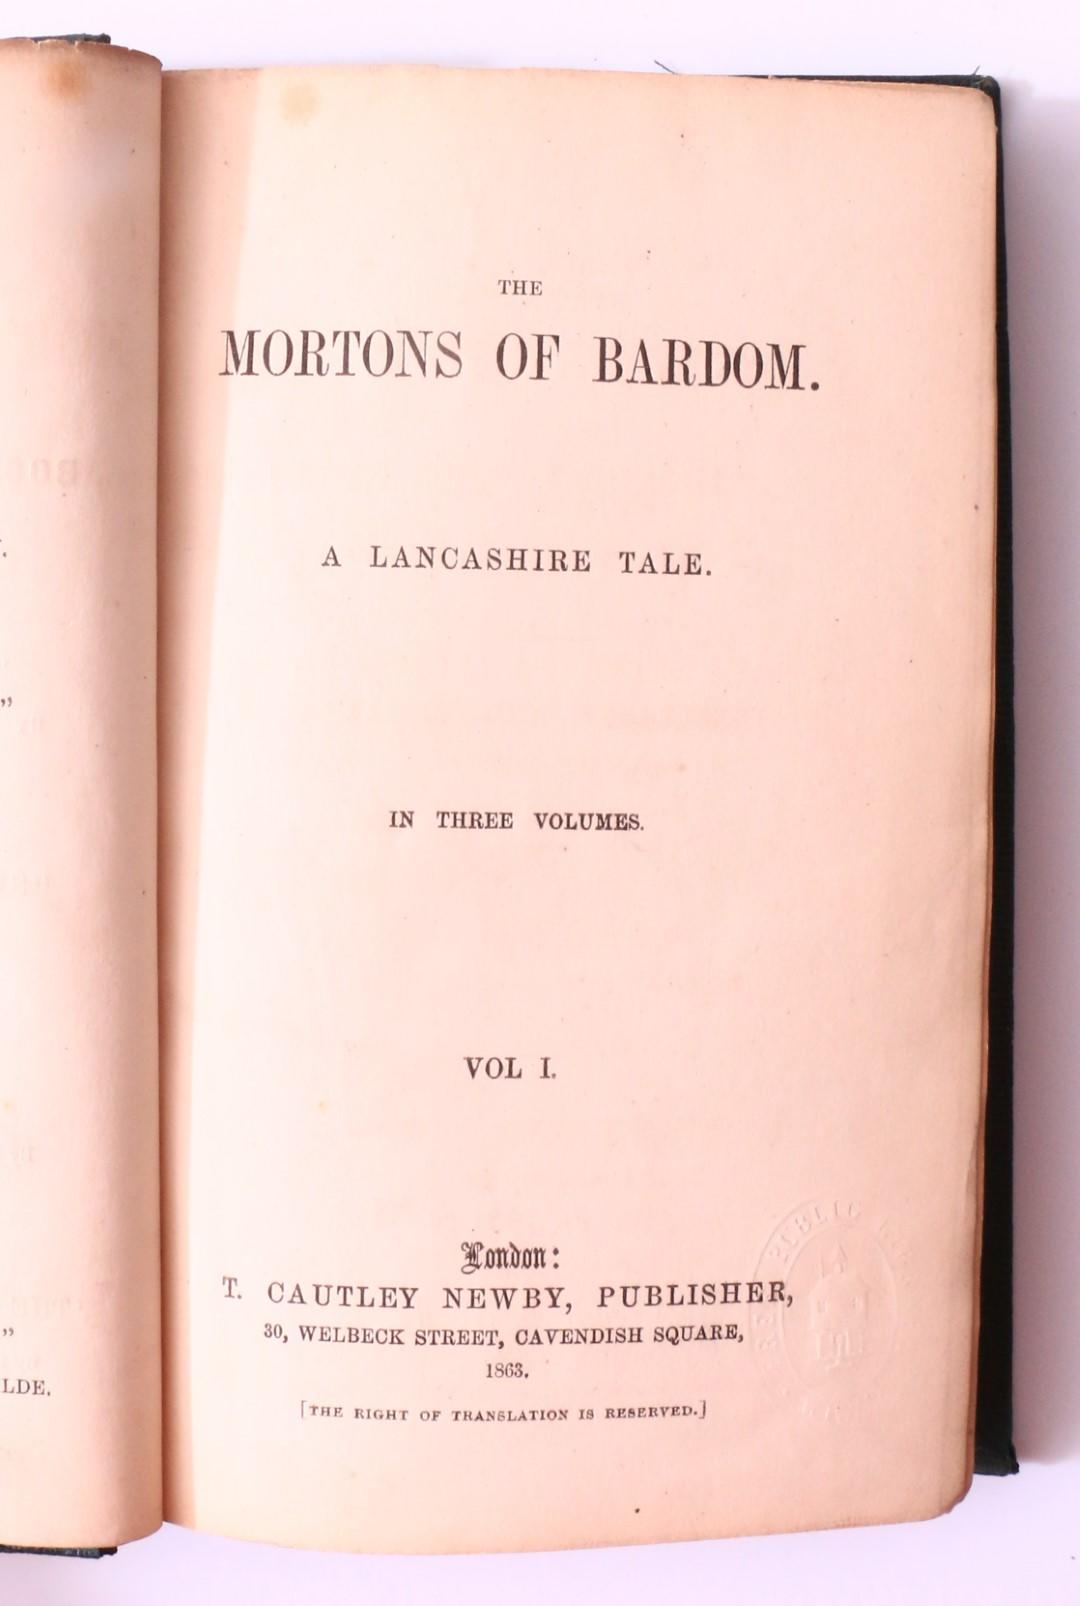 Anonymous - The Mortons of Bardom: A Lancashire Tale - T. Cautley Newby, 1863, First Edition.